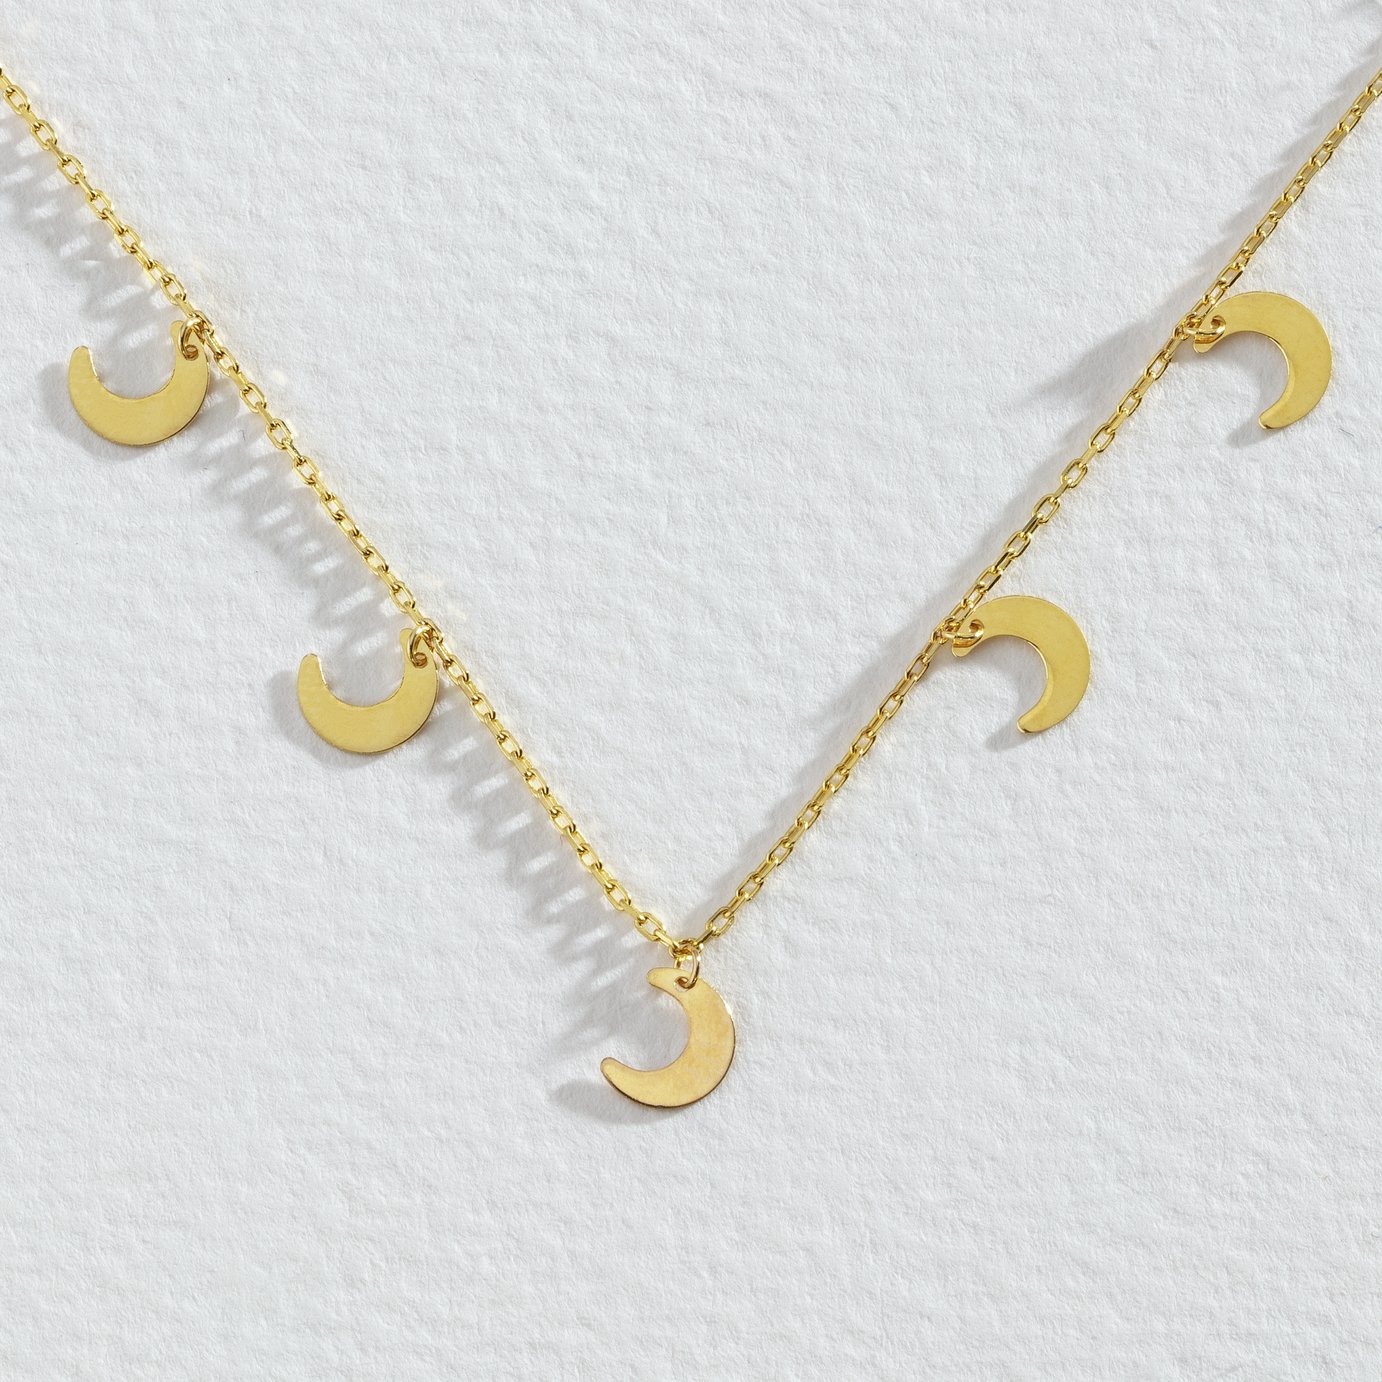 Revere Gold Plated Sterling Silver Crescent Moon Necklace